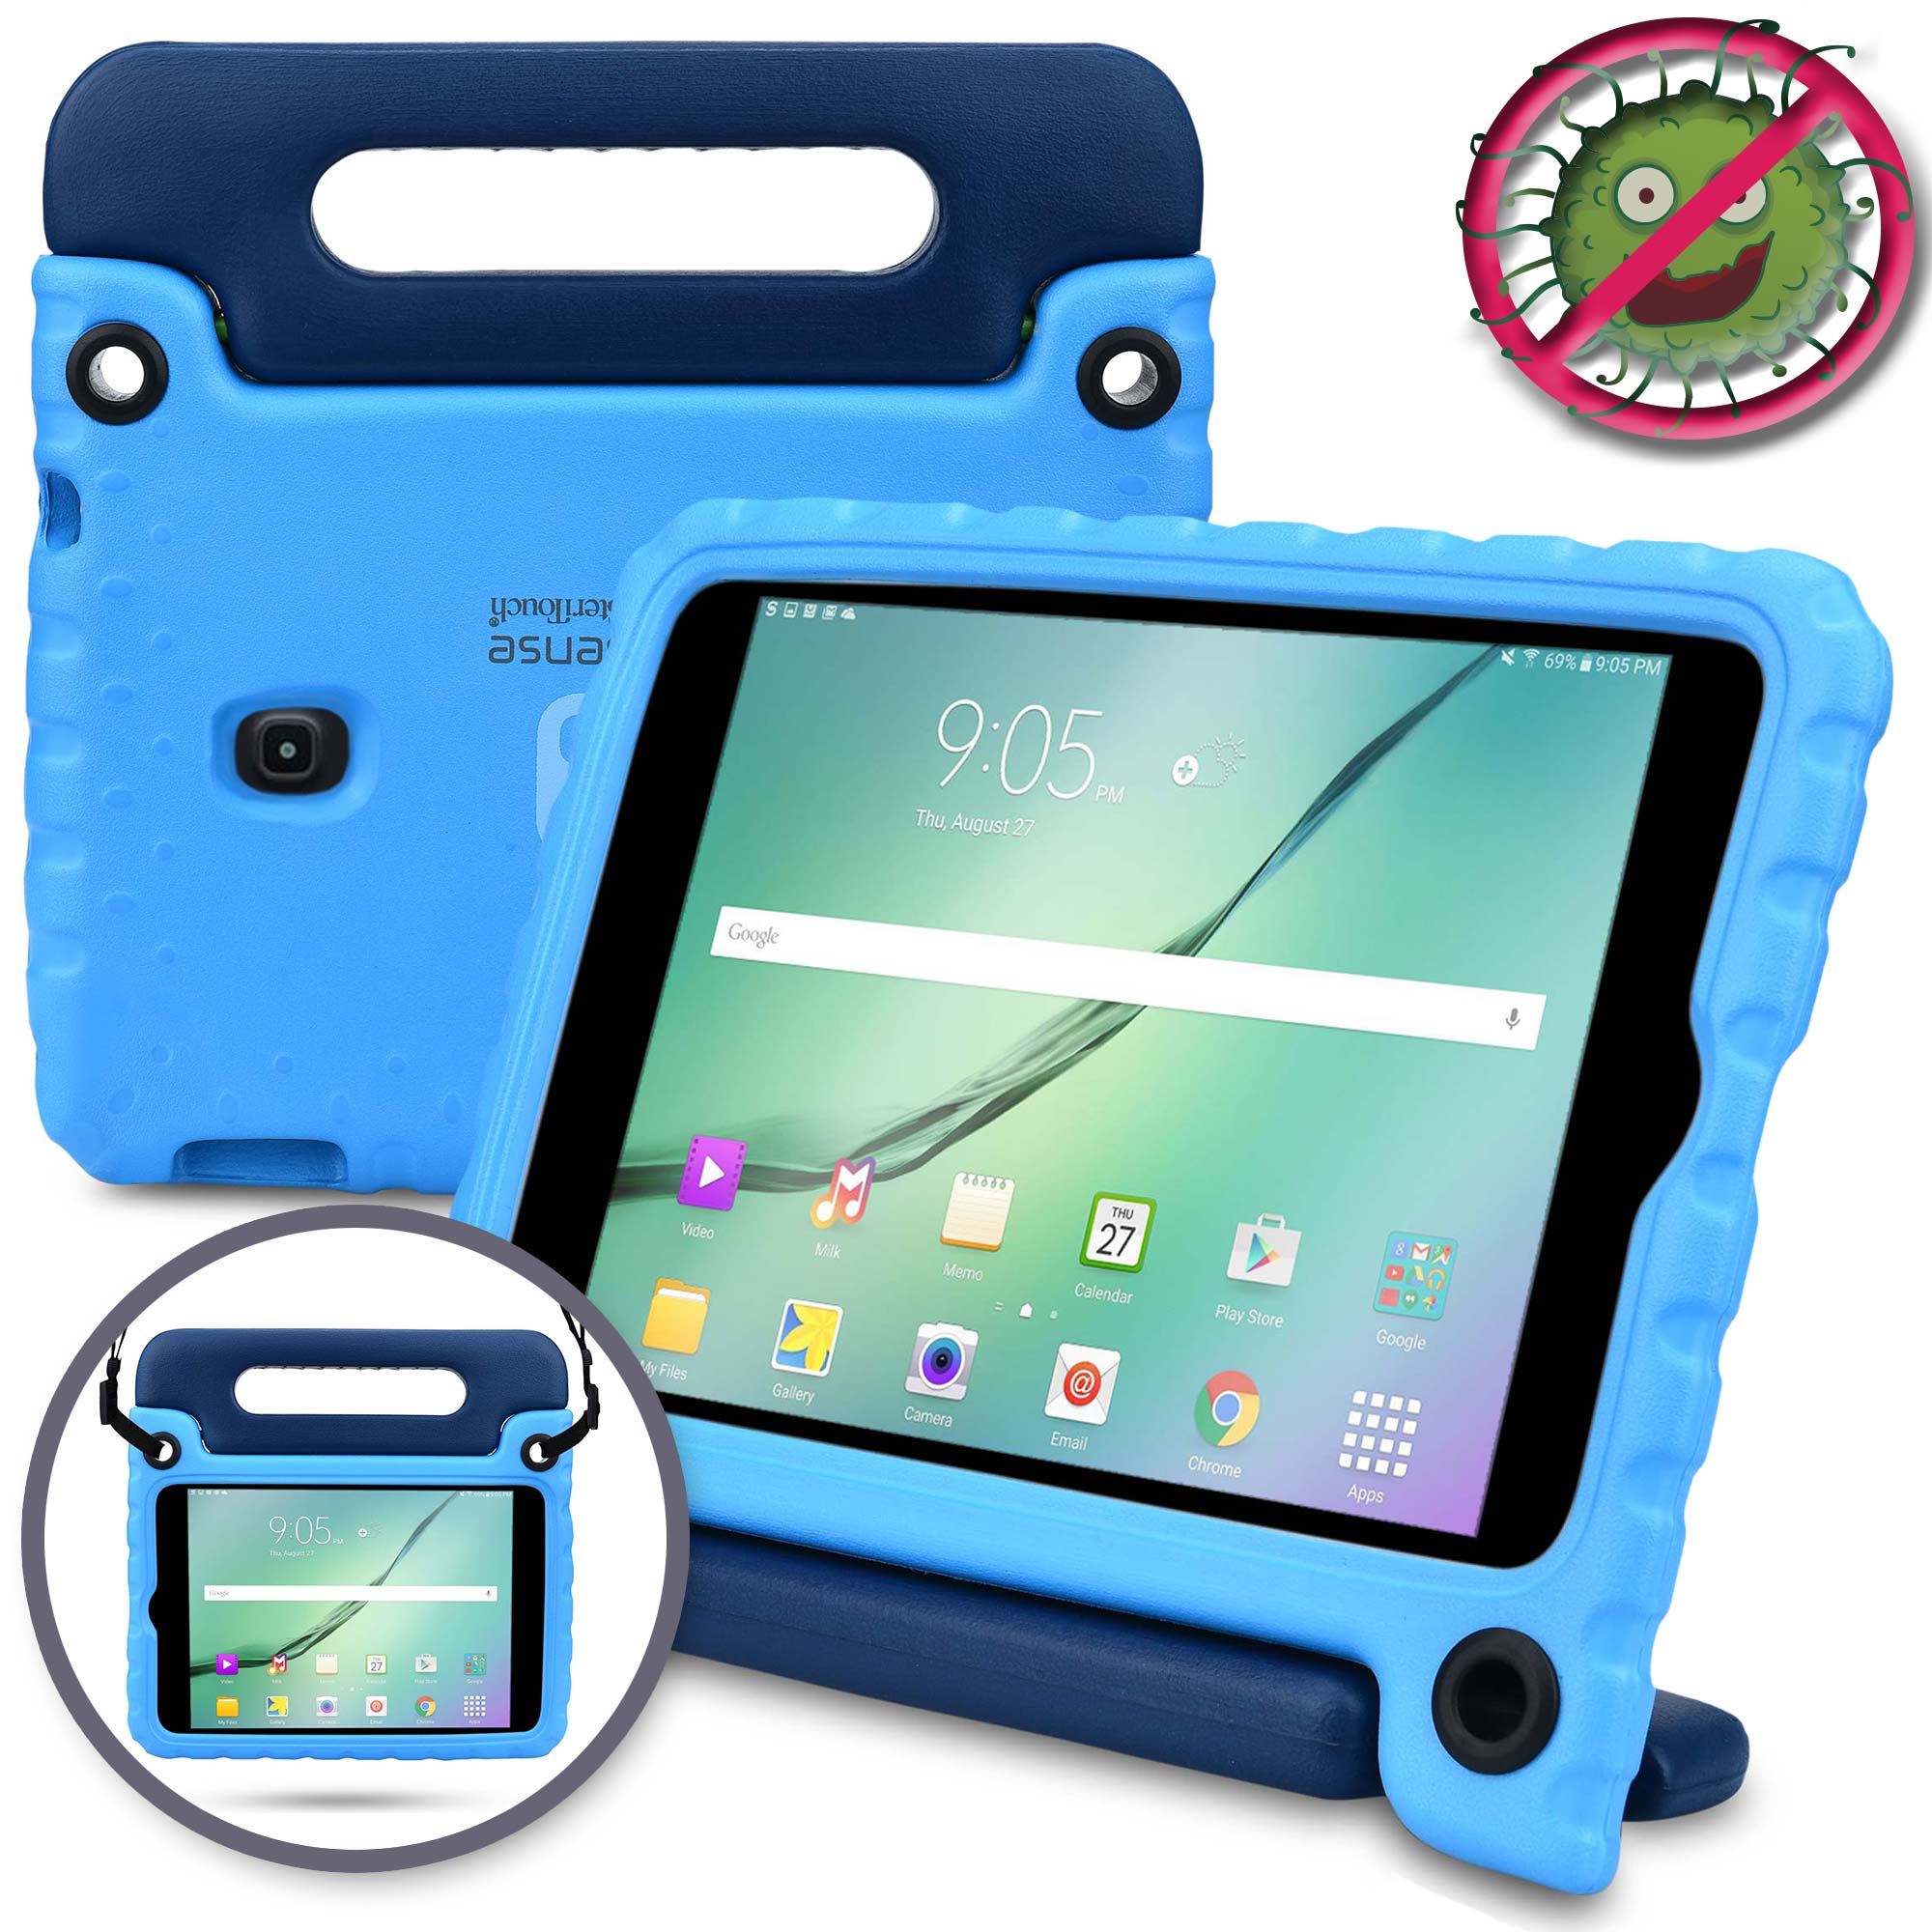 Buddy Antibacterial Protective Kids case for Samsung Galaxy Tab A 8.0 (2018) // Handle+Stand, Shoulder Strap, Screen Spray